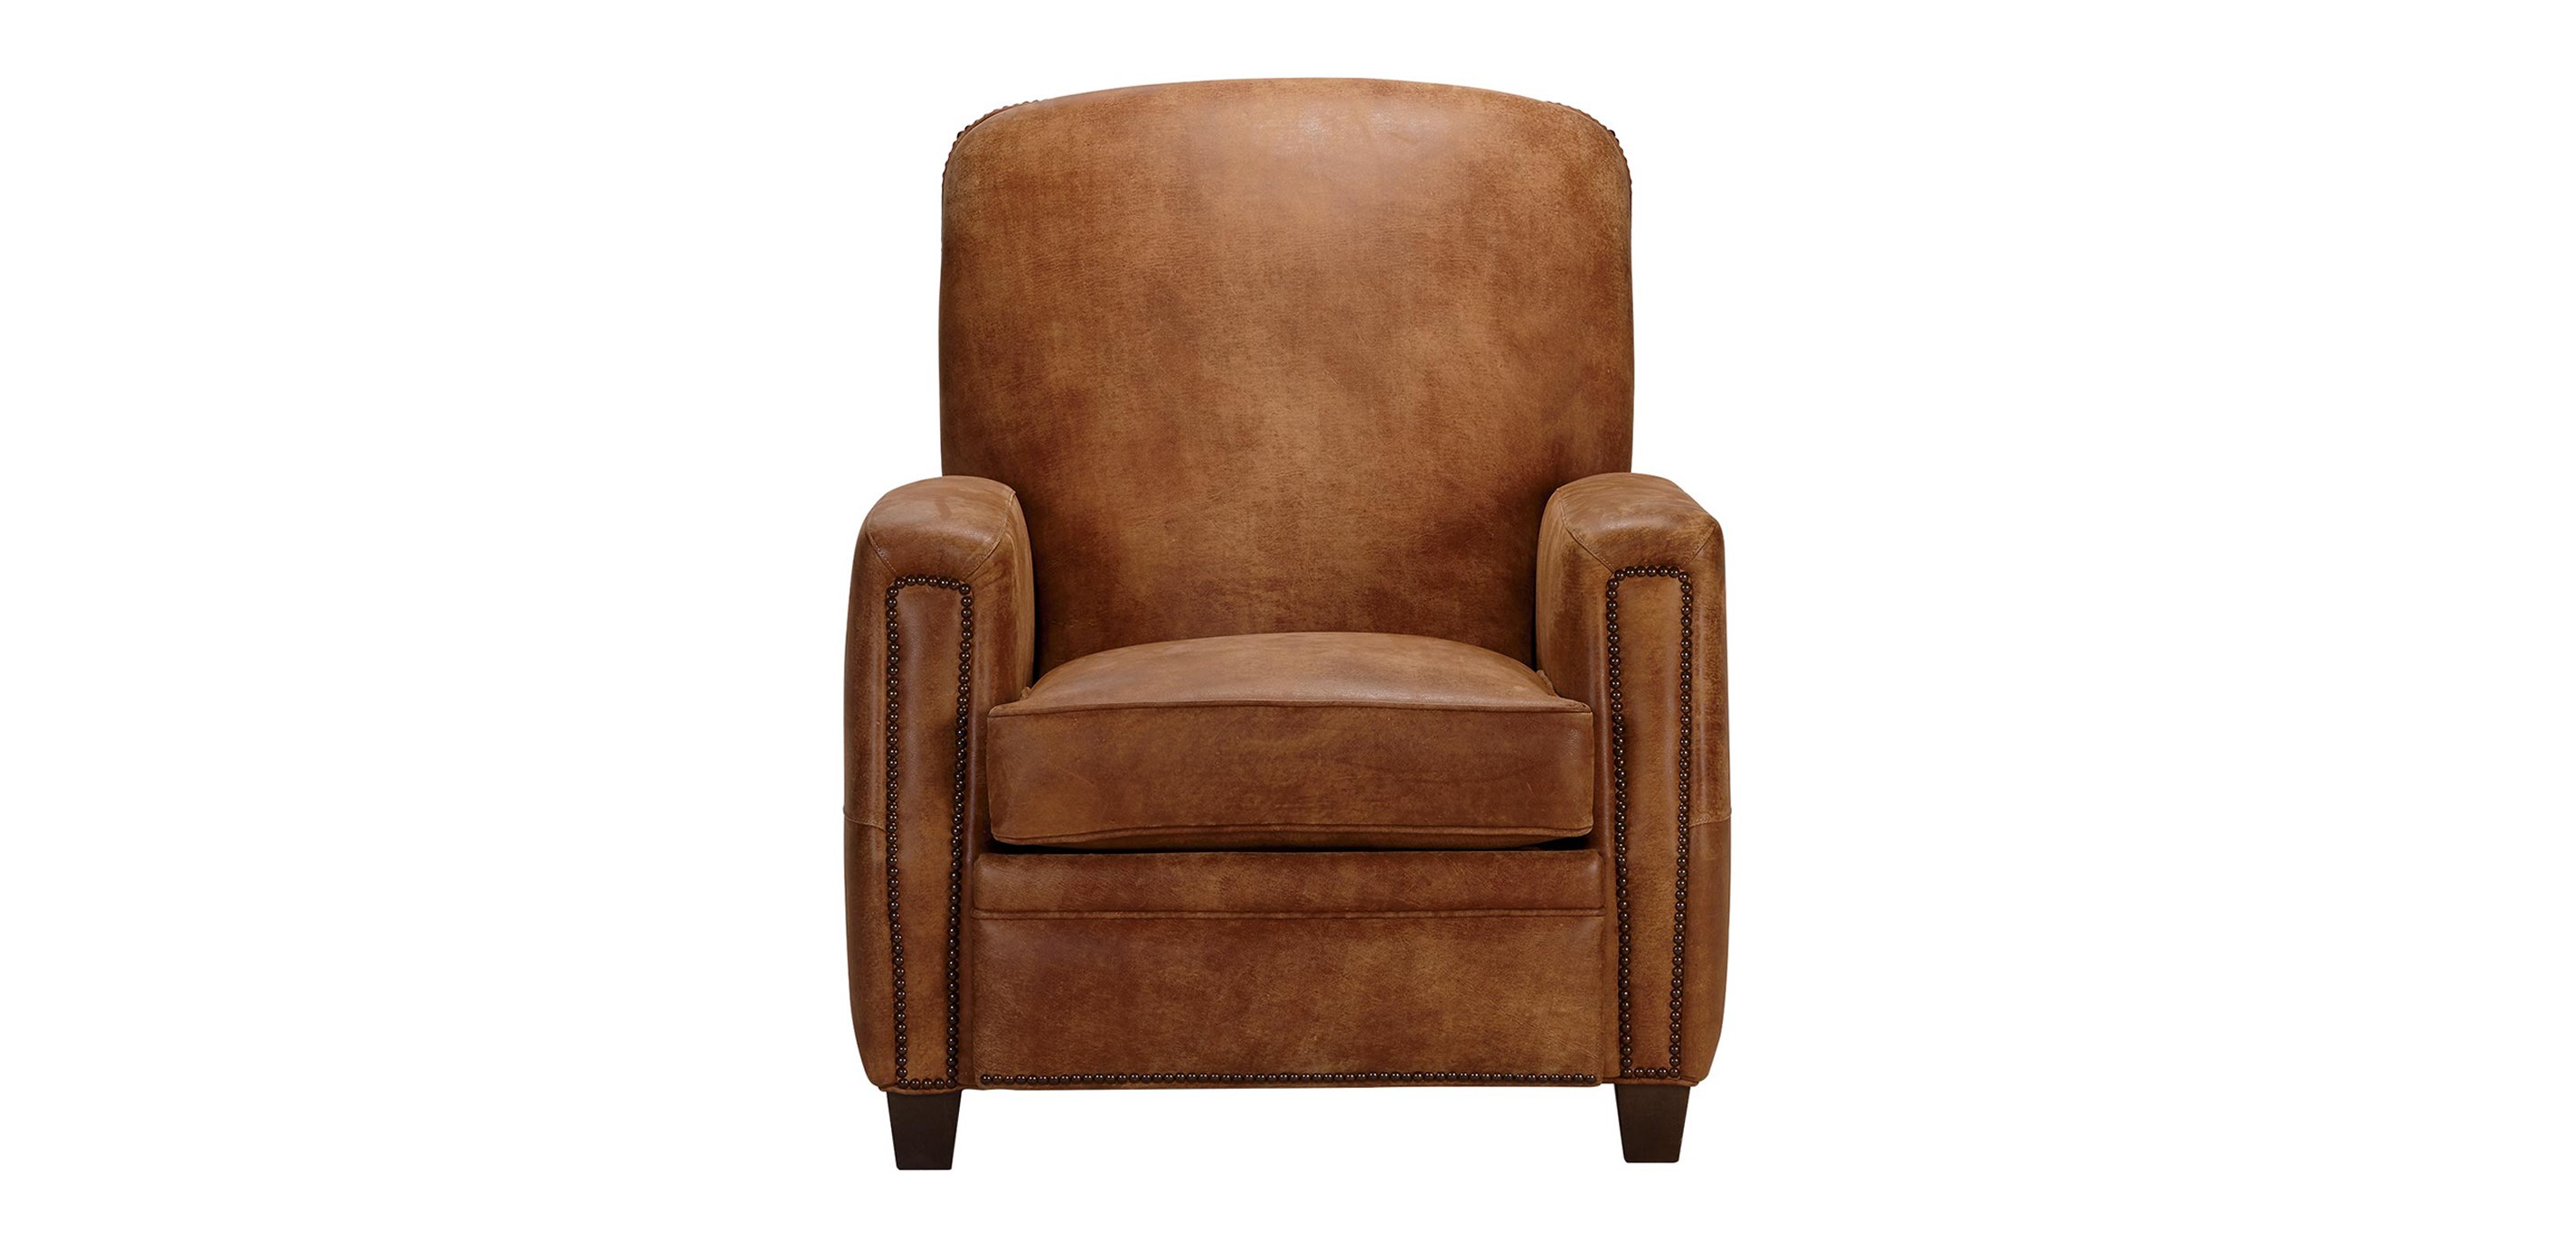 Dean Leather Recliner Recliners, Brown Leather Recliners